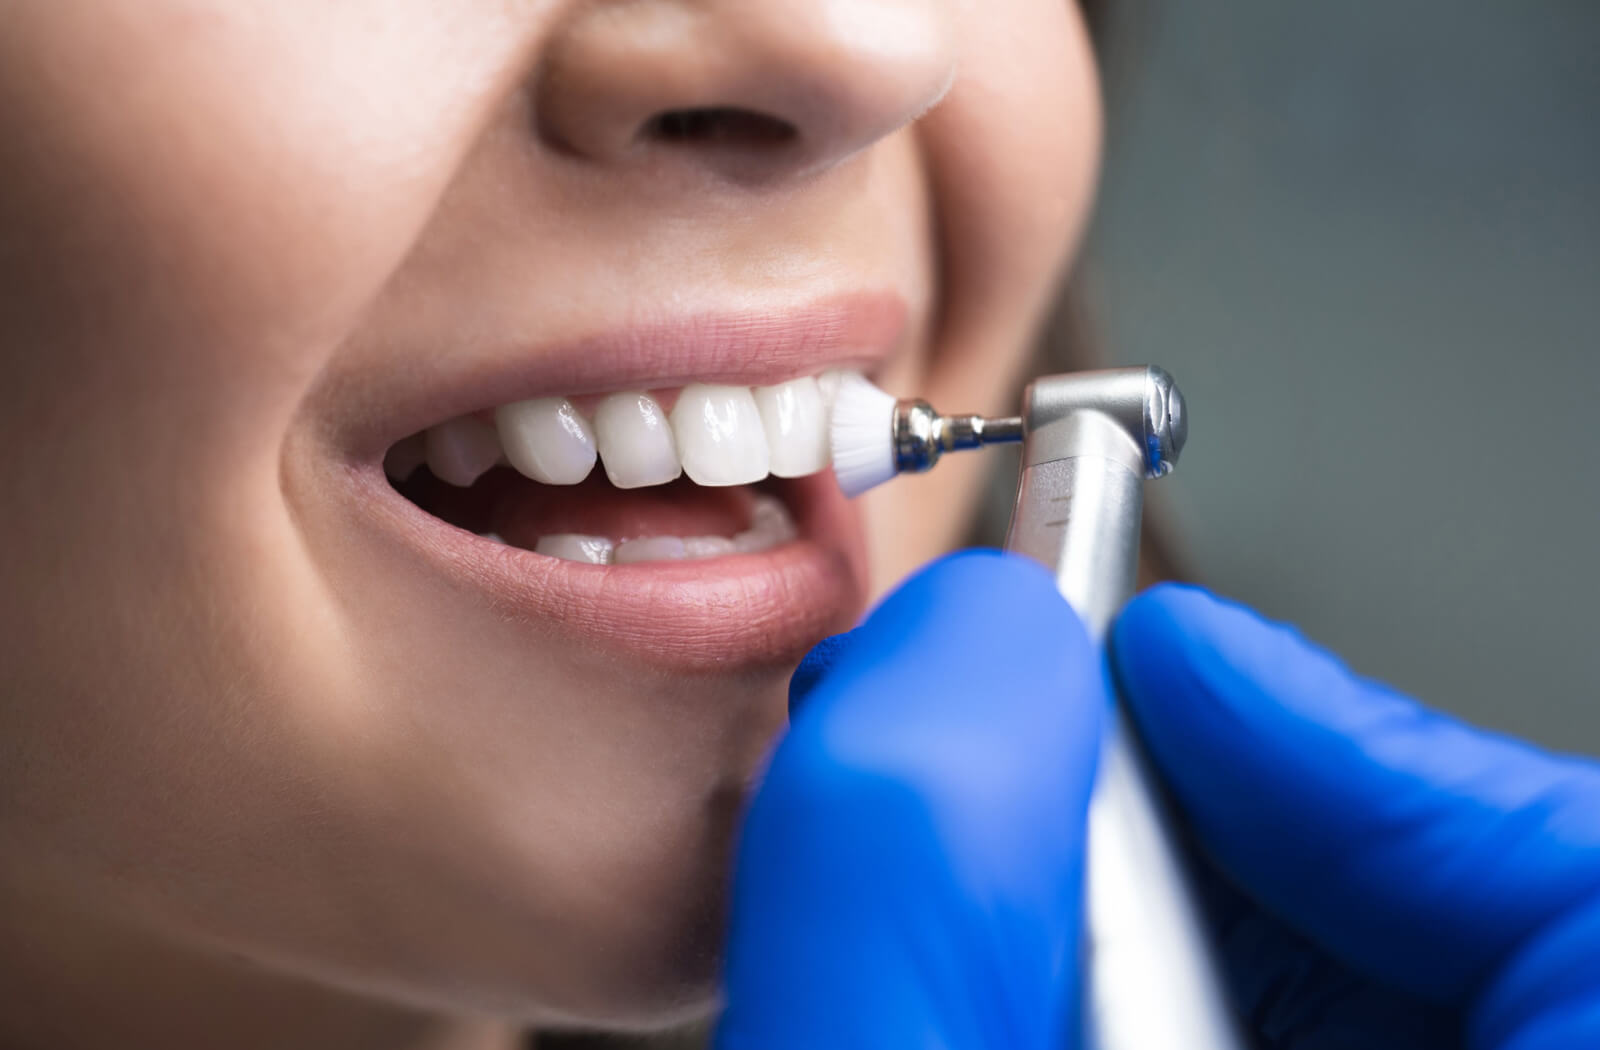 A woman's mouth is open and a hand in a blue glove holding a dental brush is cleaning the patient's teeth.